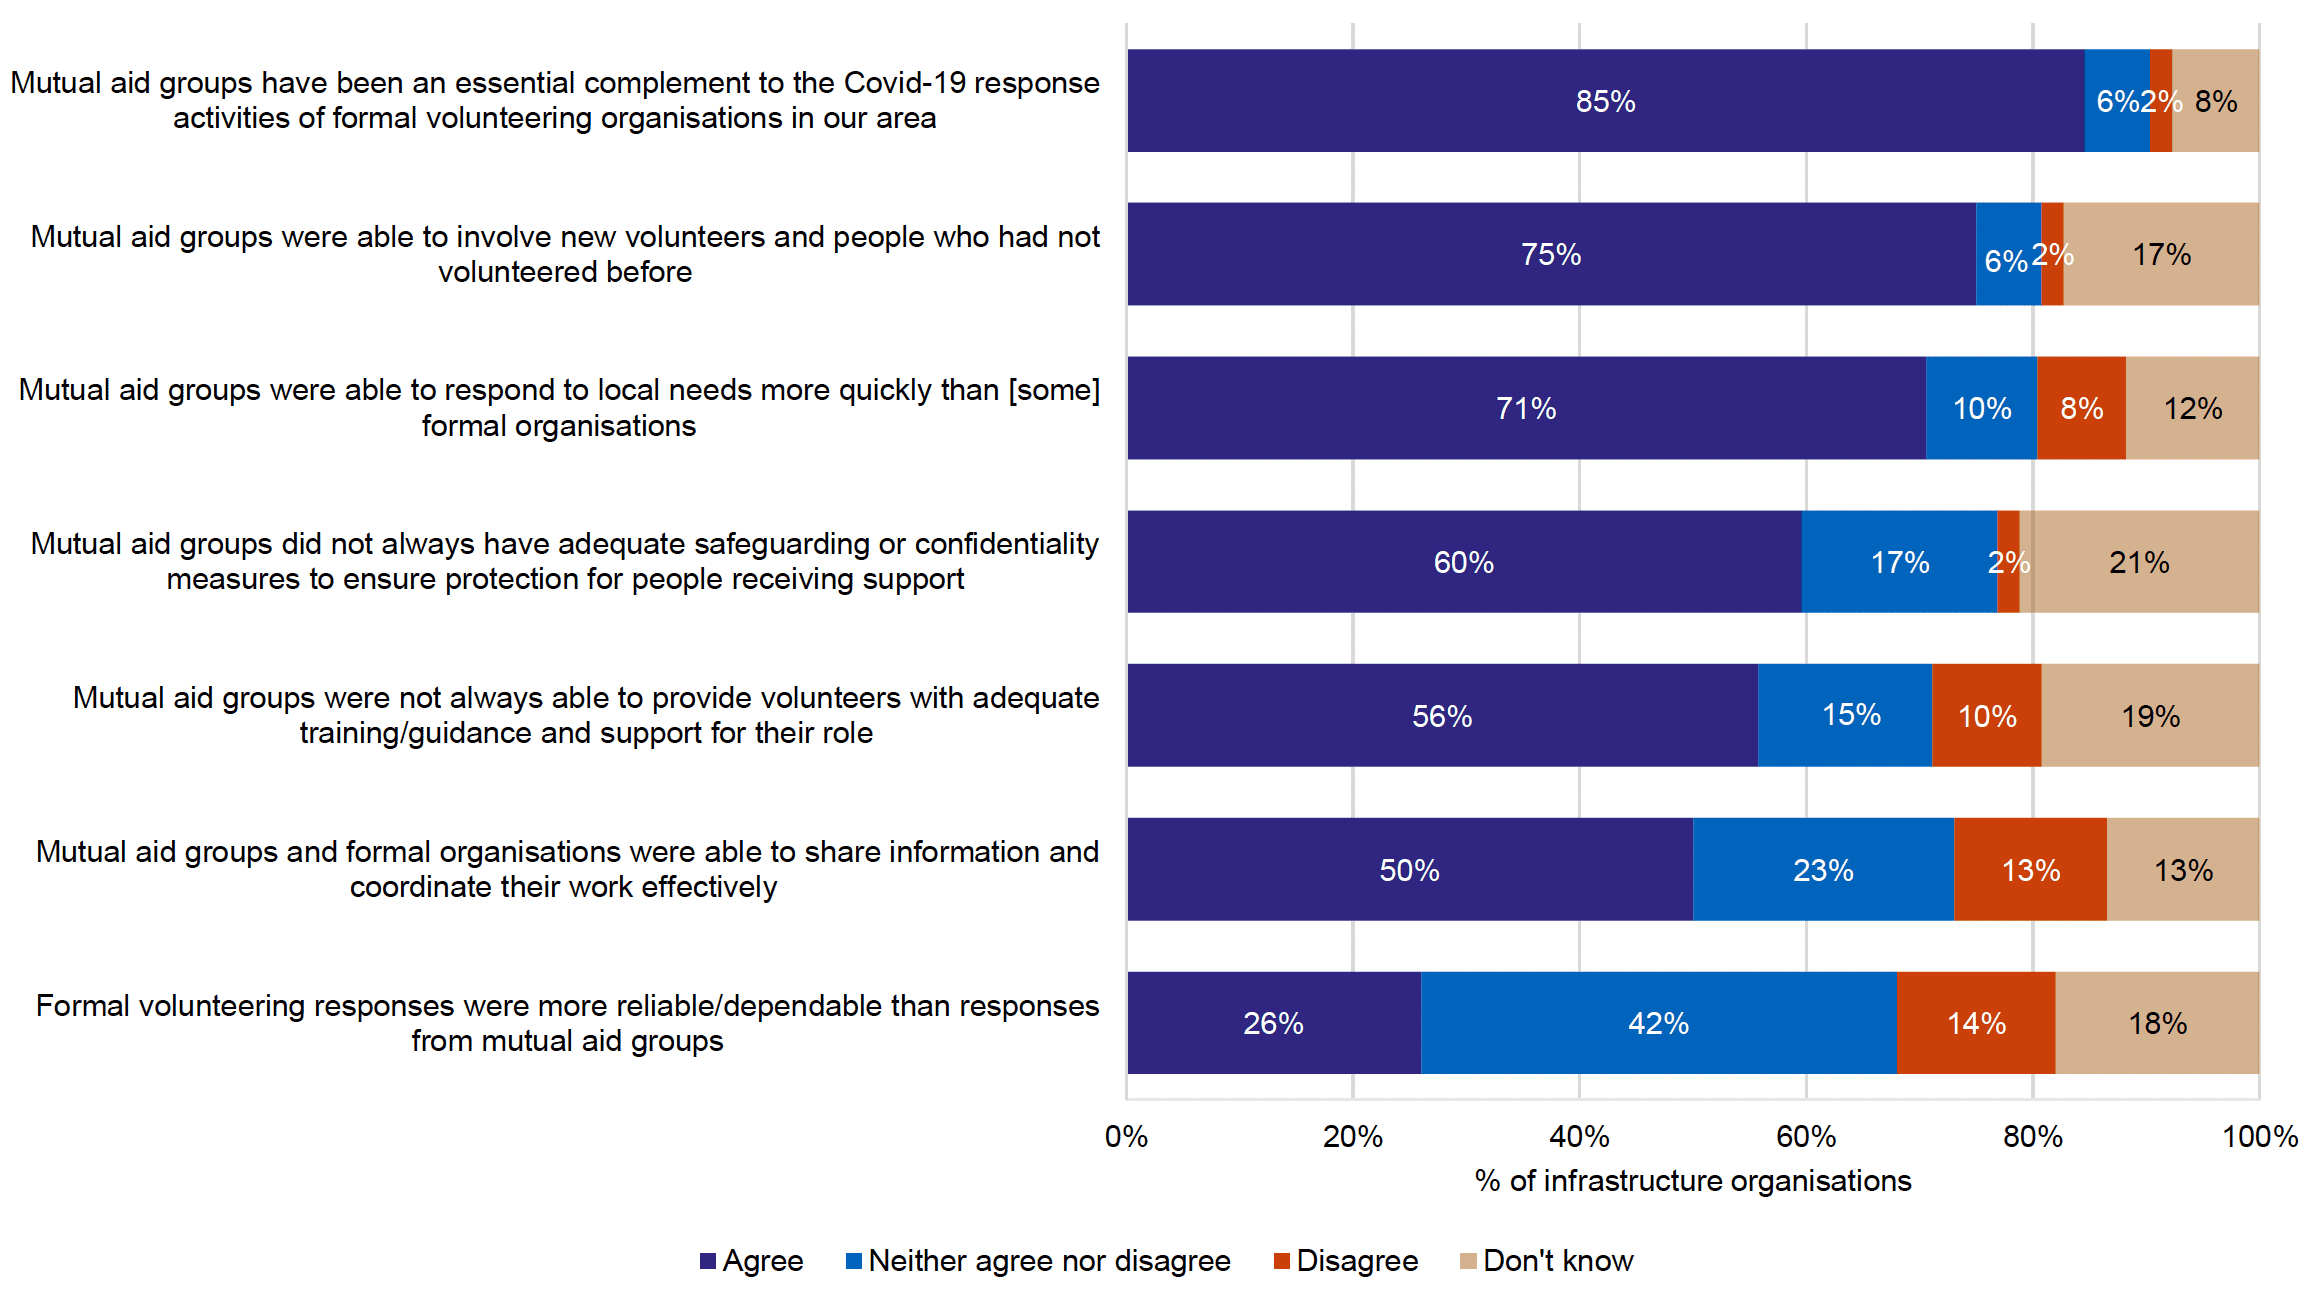 Chart showing infrastructure organisation views on the mutual aid response during COVID-19